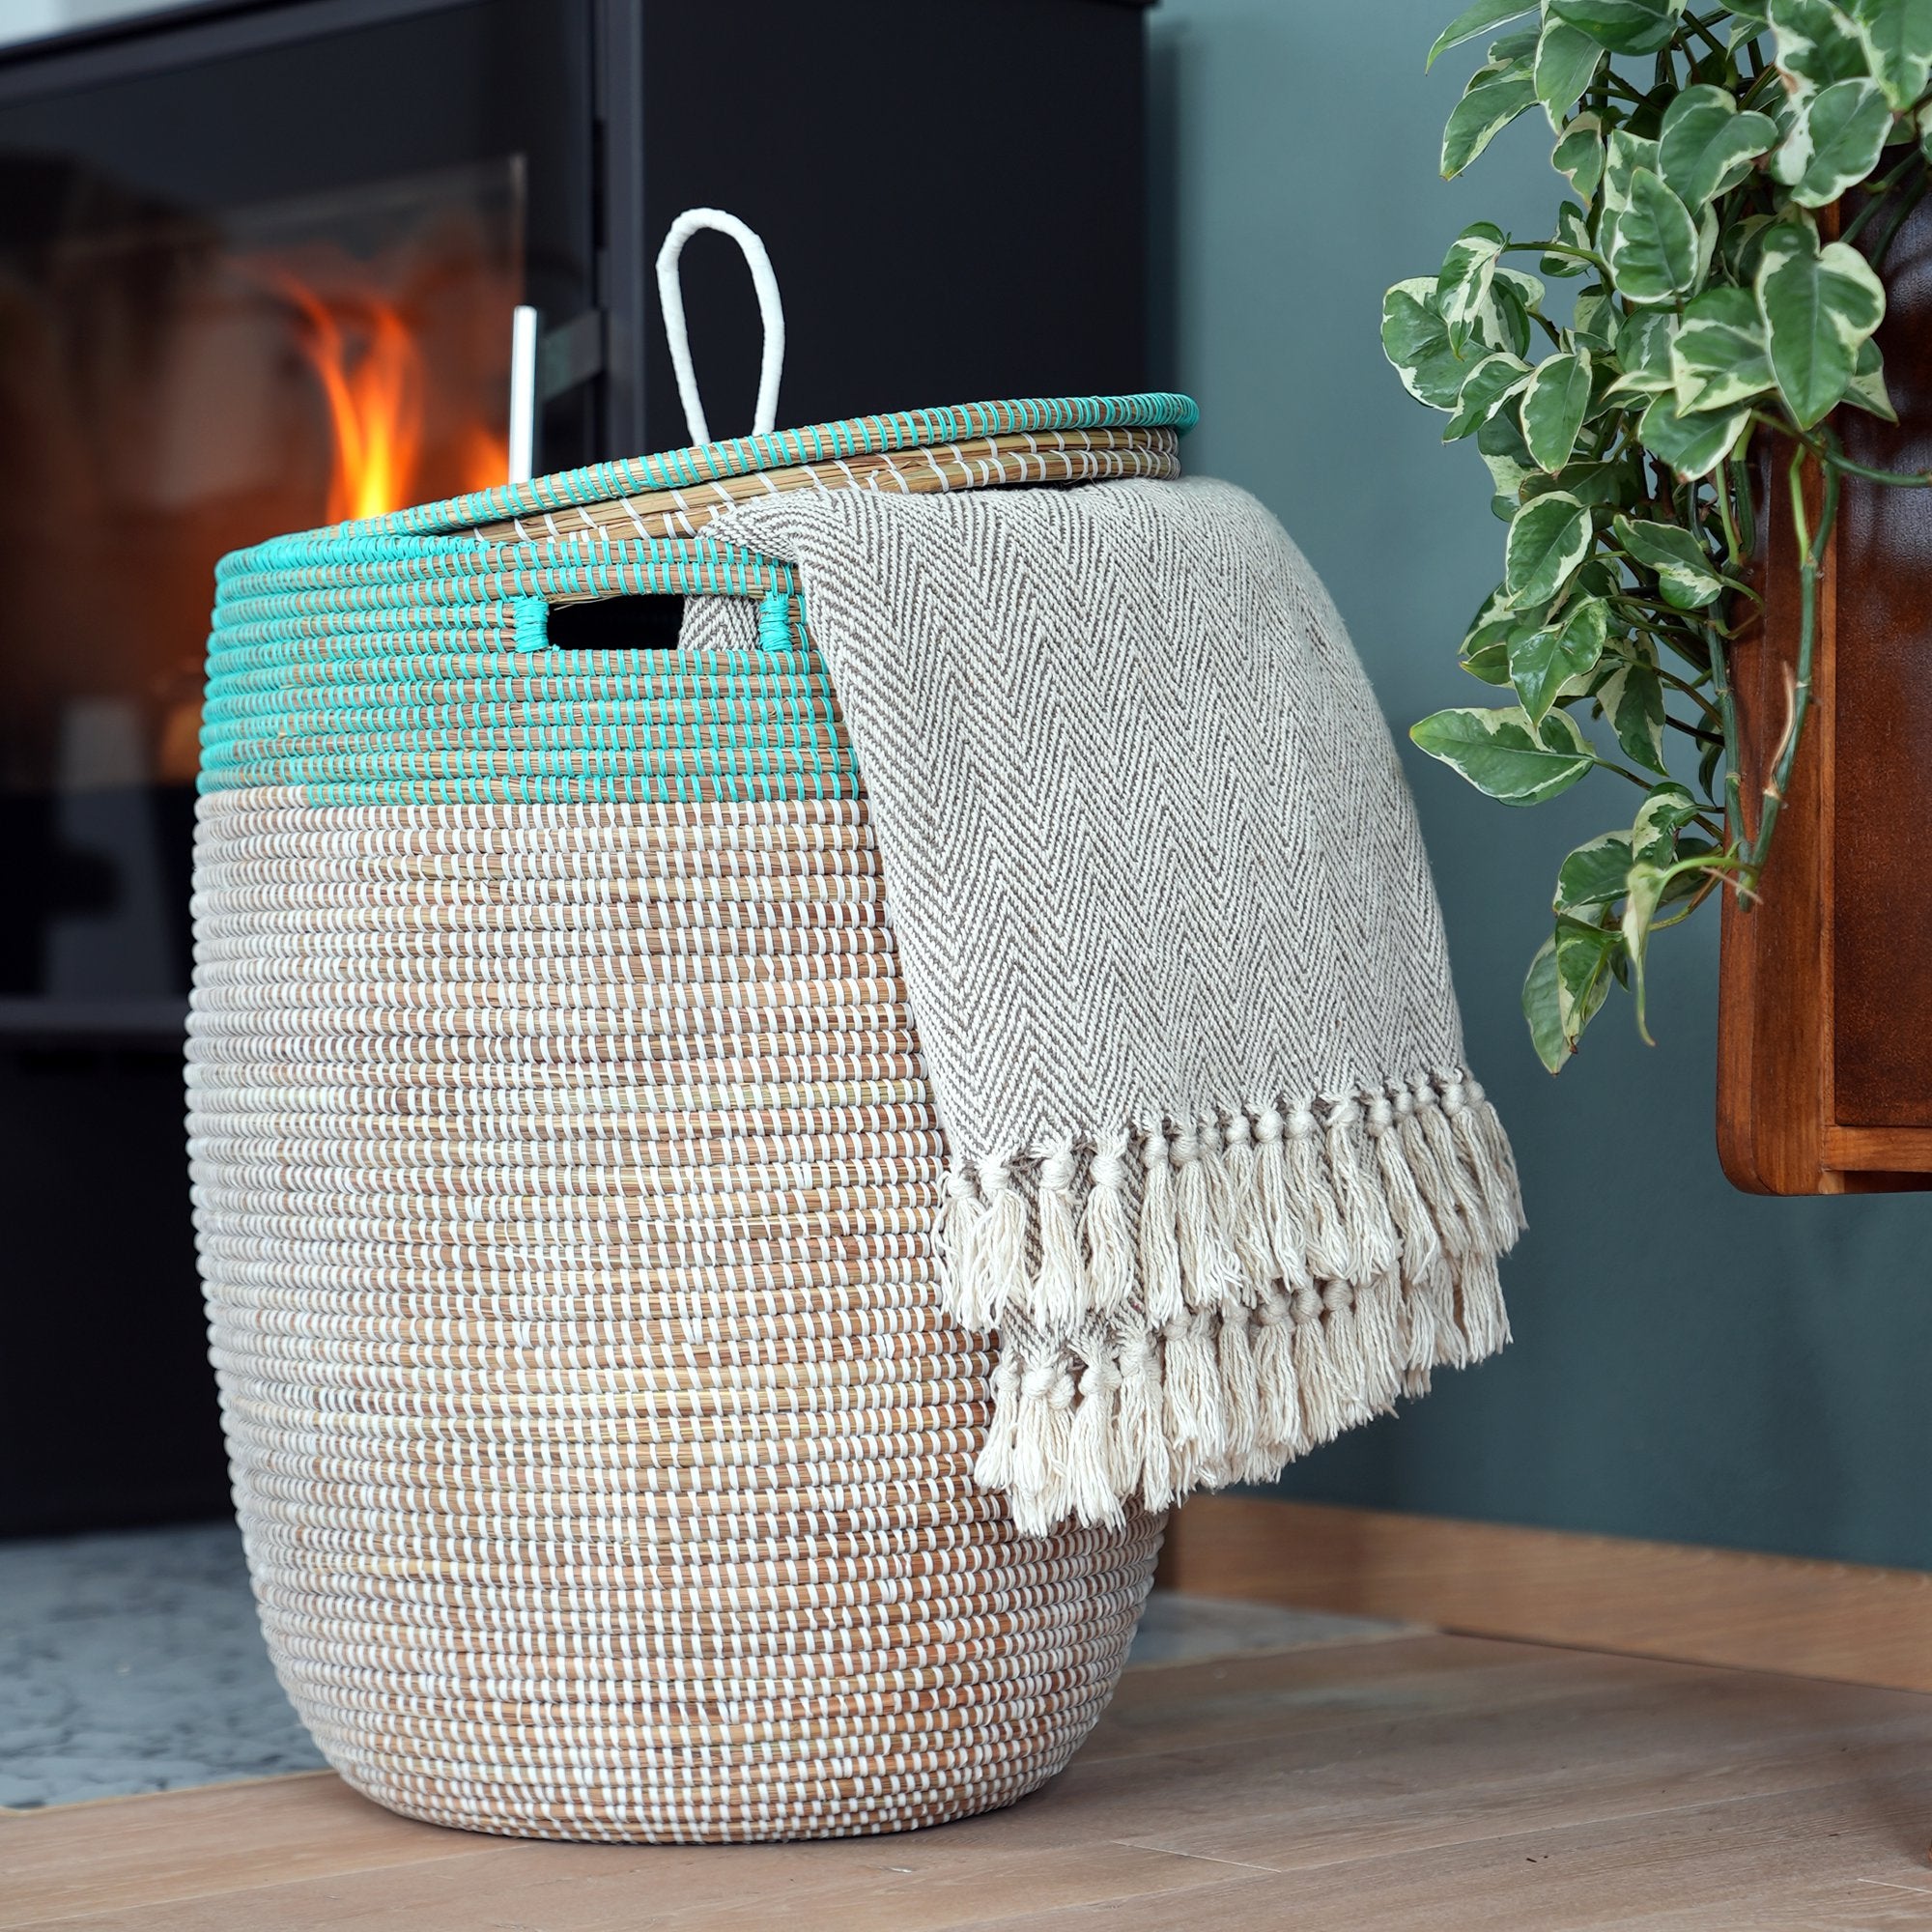 African Laundry Baskets with Flat Lid - Turquoise